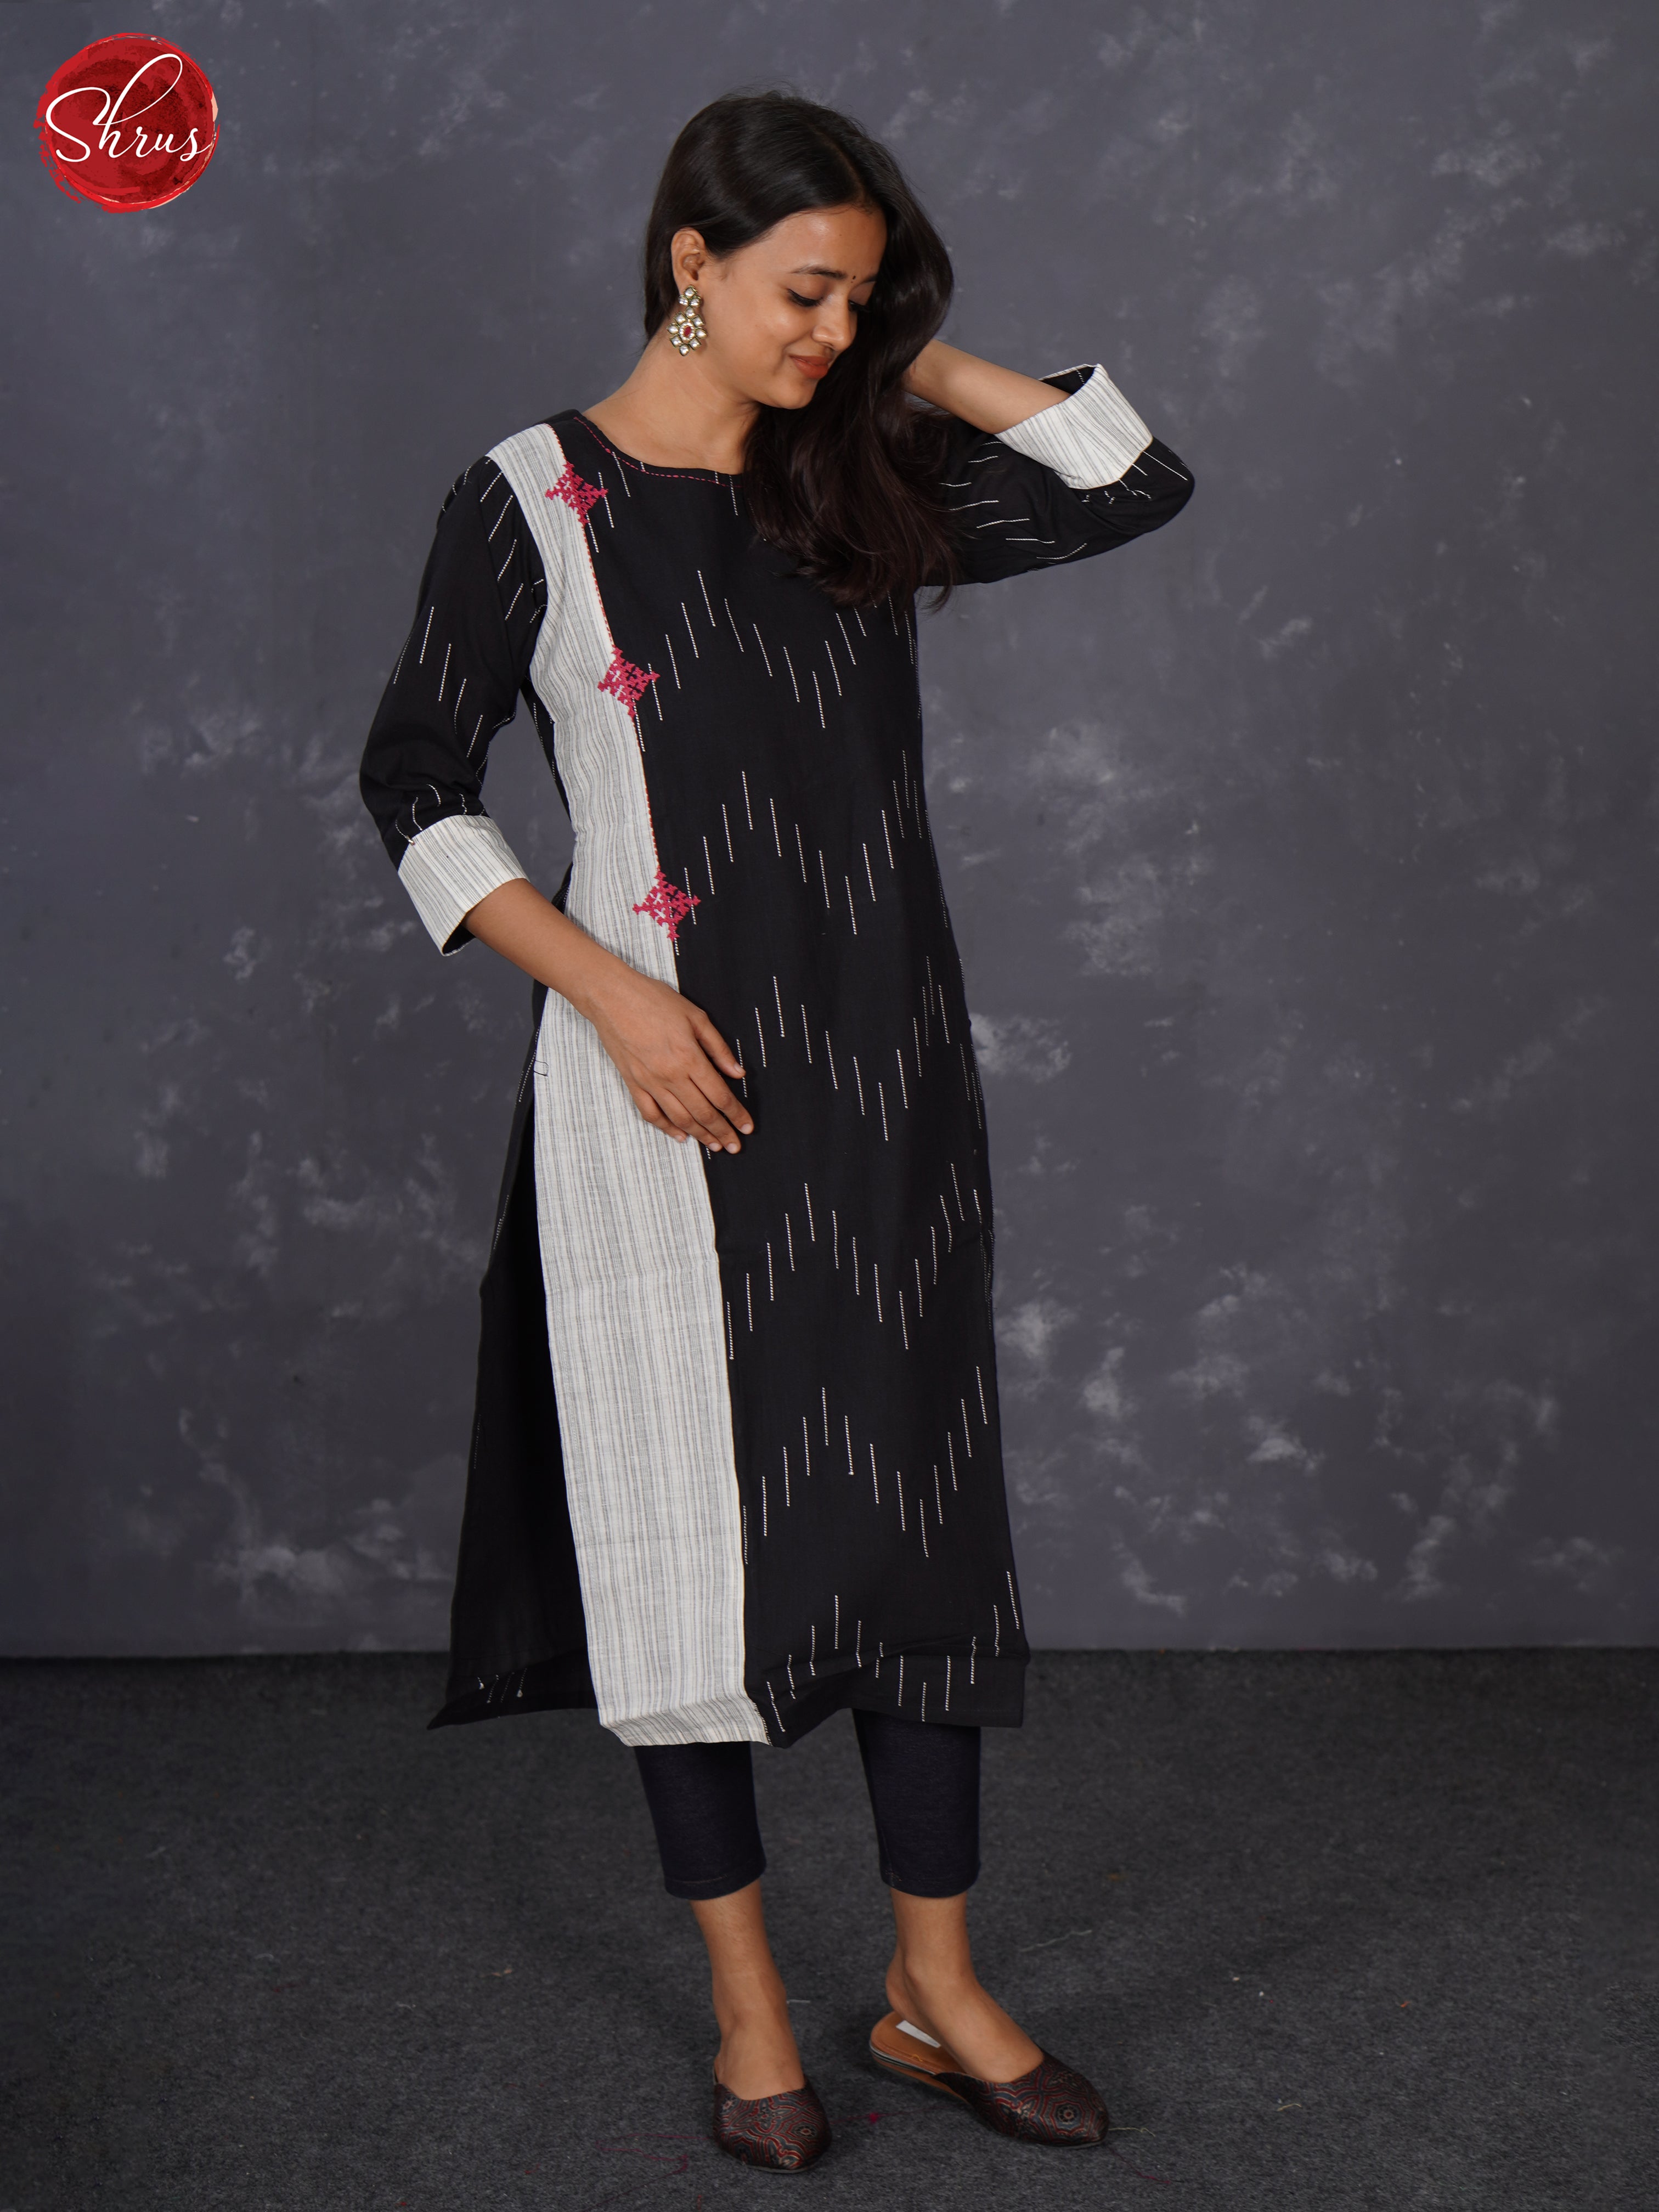 Black & White - Readymade kurti top with ikkat patch work - Shop on ShrusEternity.com